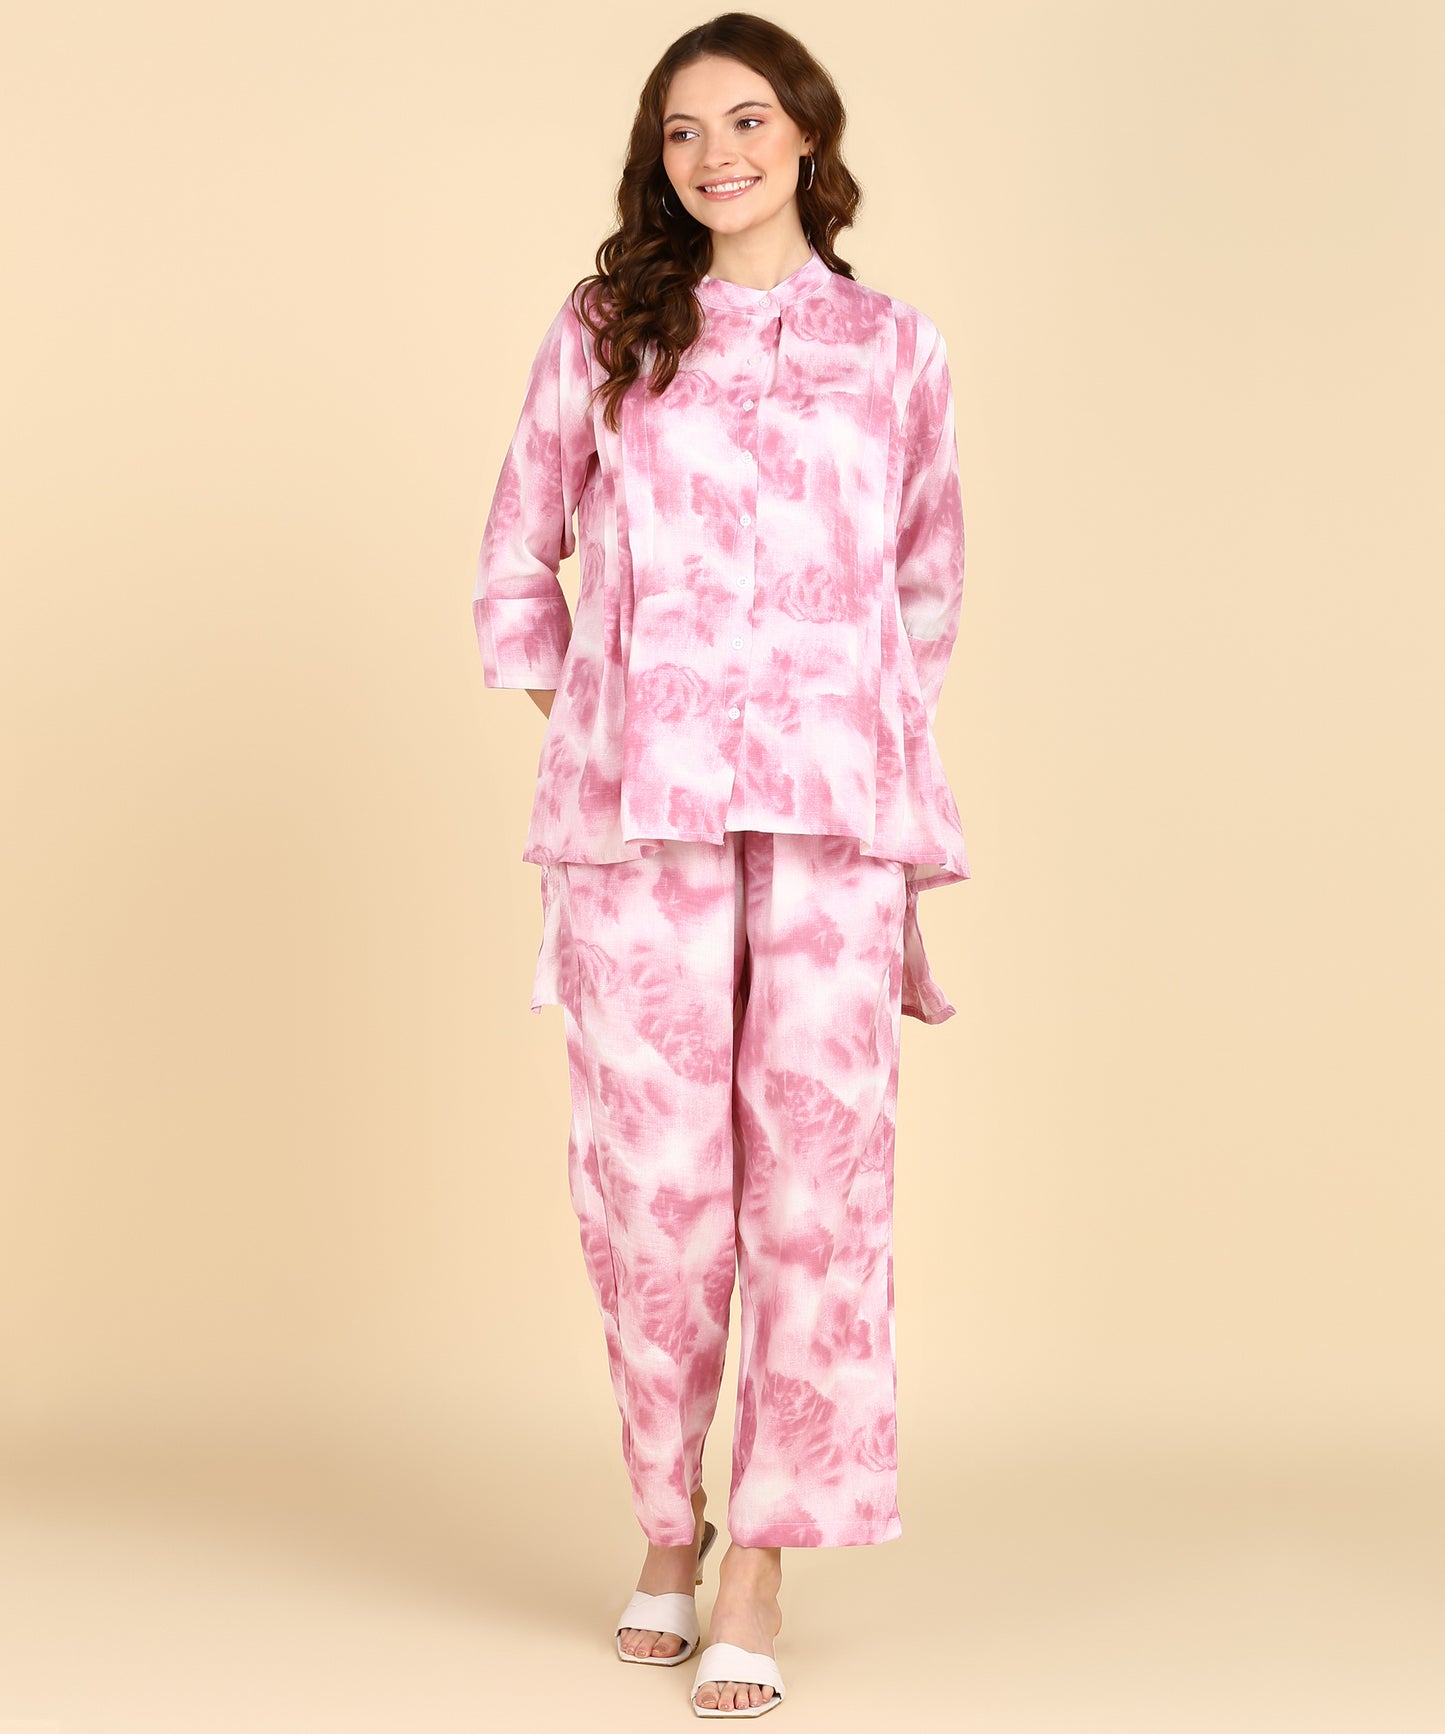 Women's Abstract Print Co-ord Set